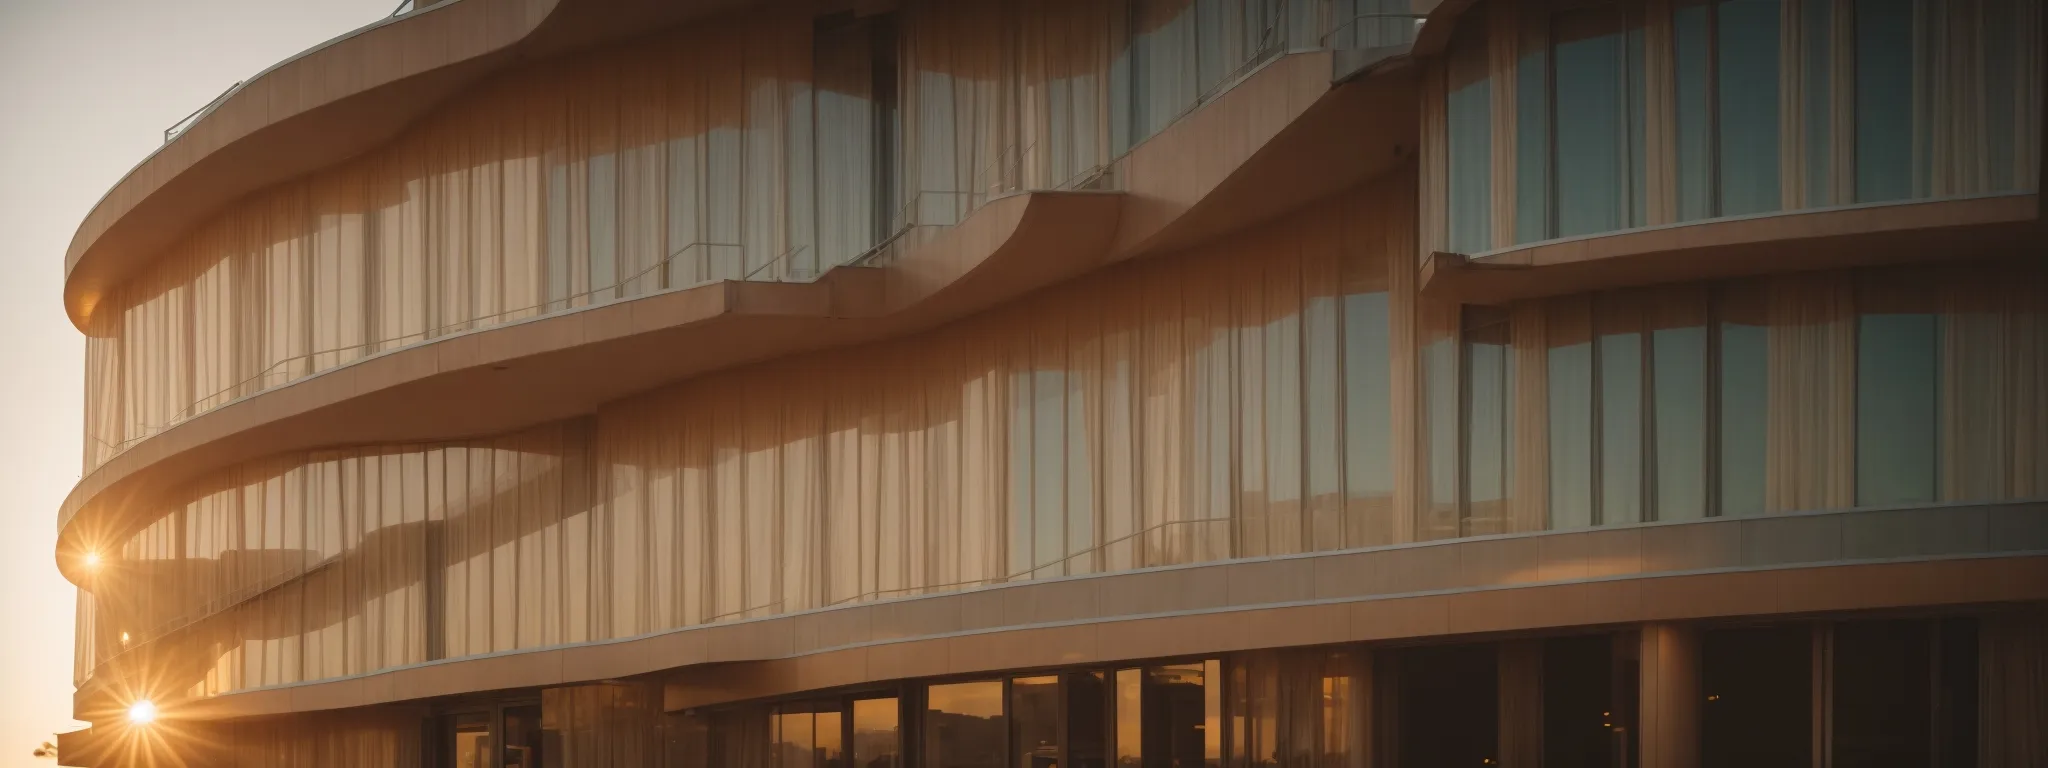 a modern hotel facade bathed in the warm glow of the setting sun.